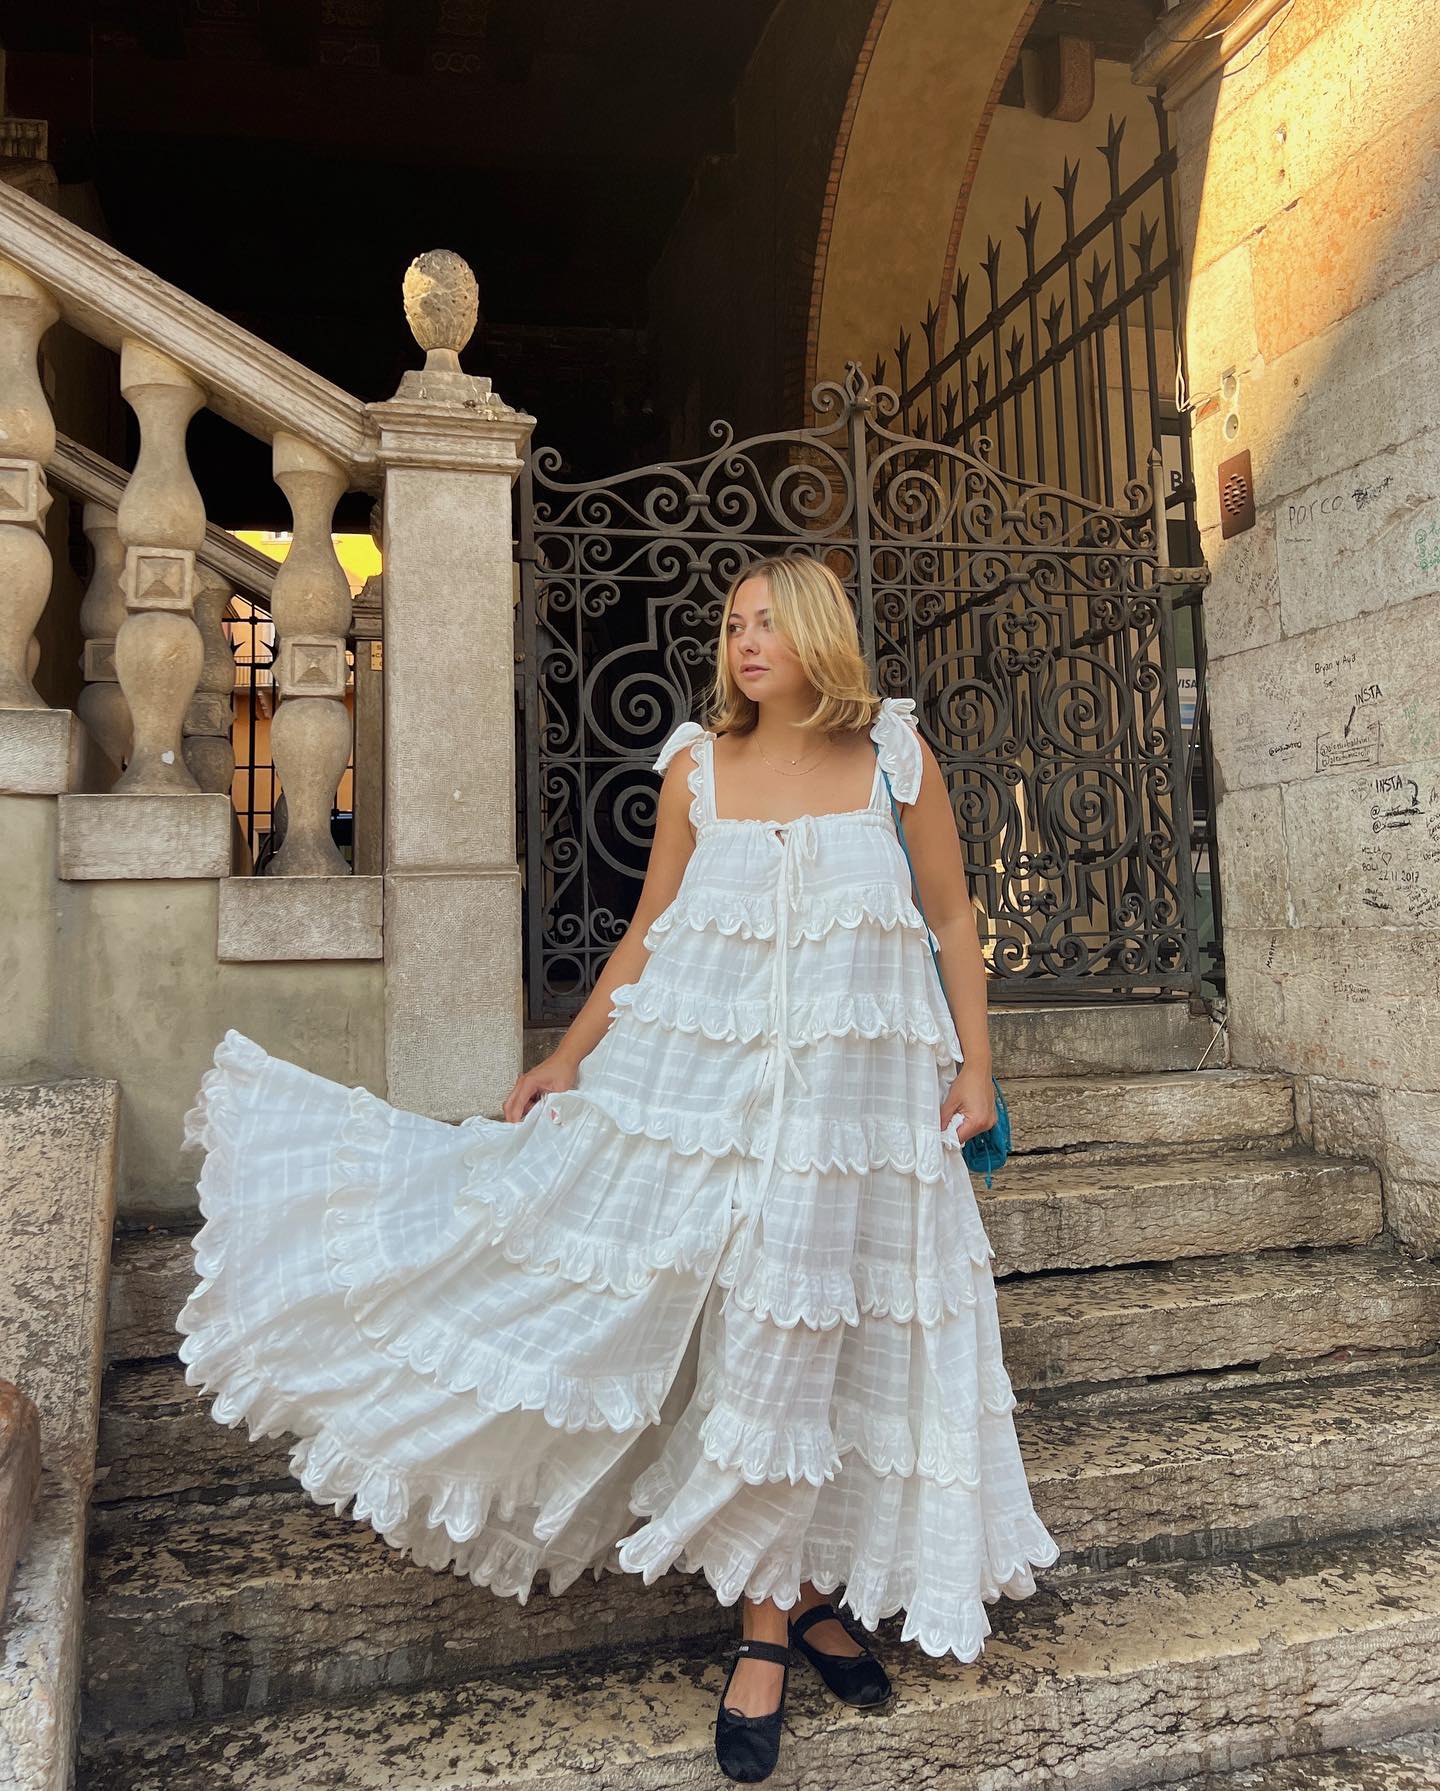 Woman on stairs wears ruffled white dress with bows